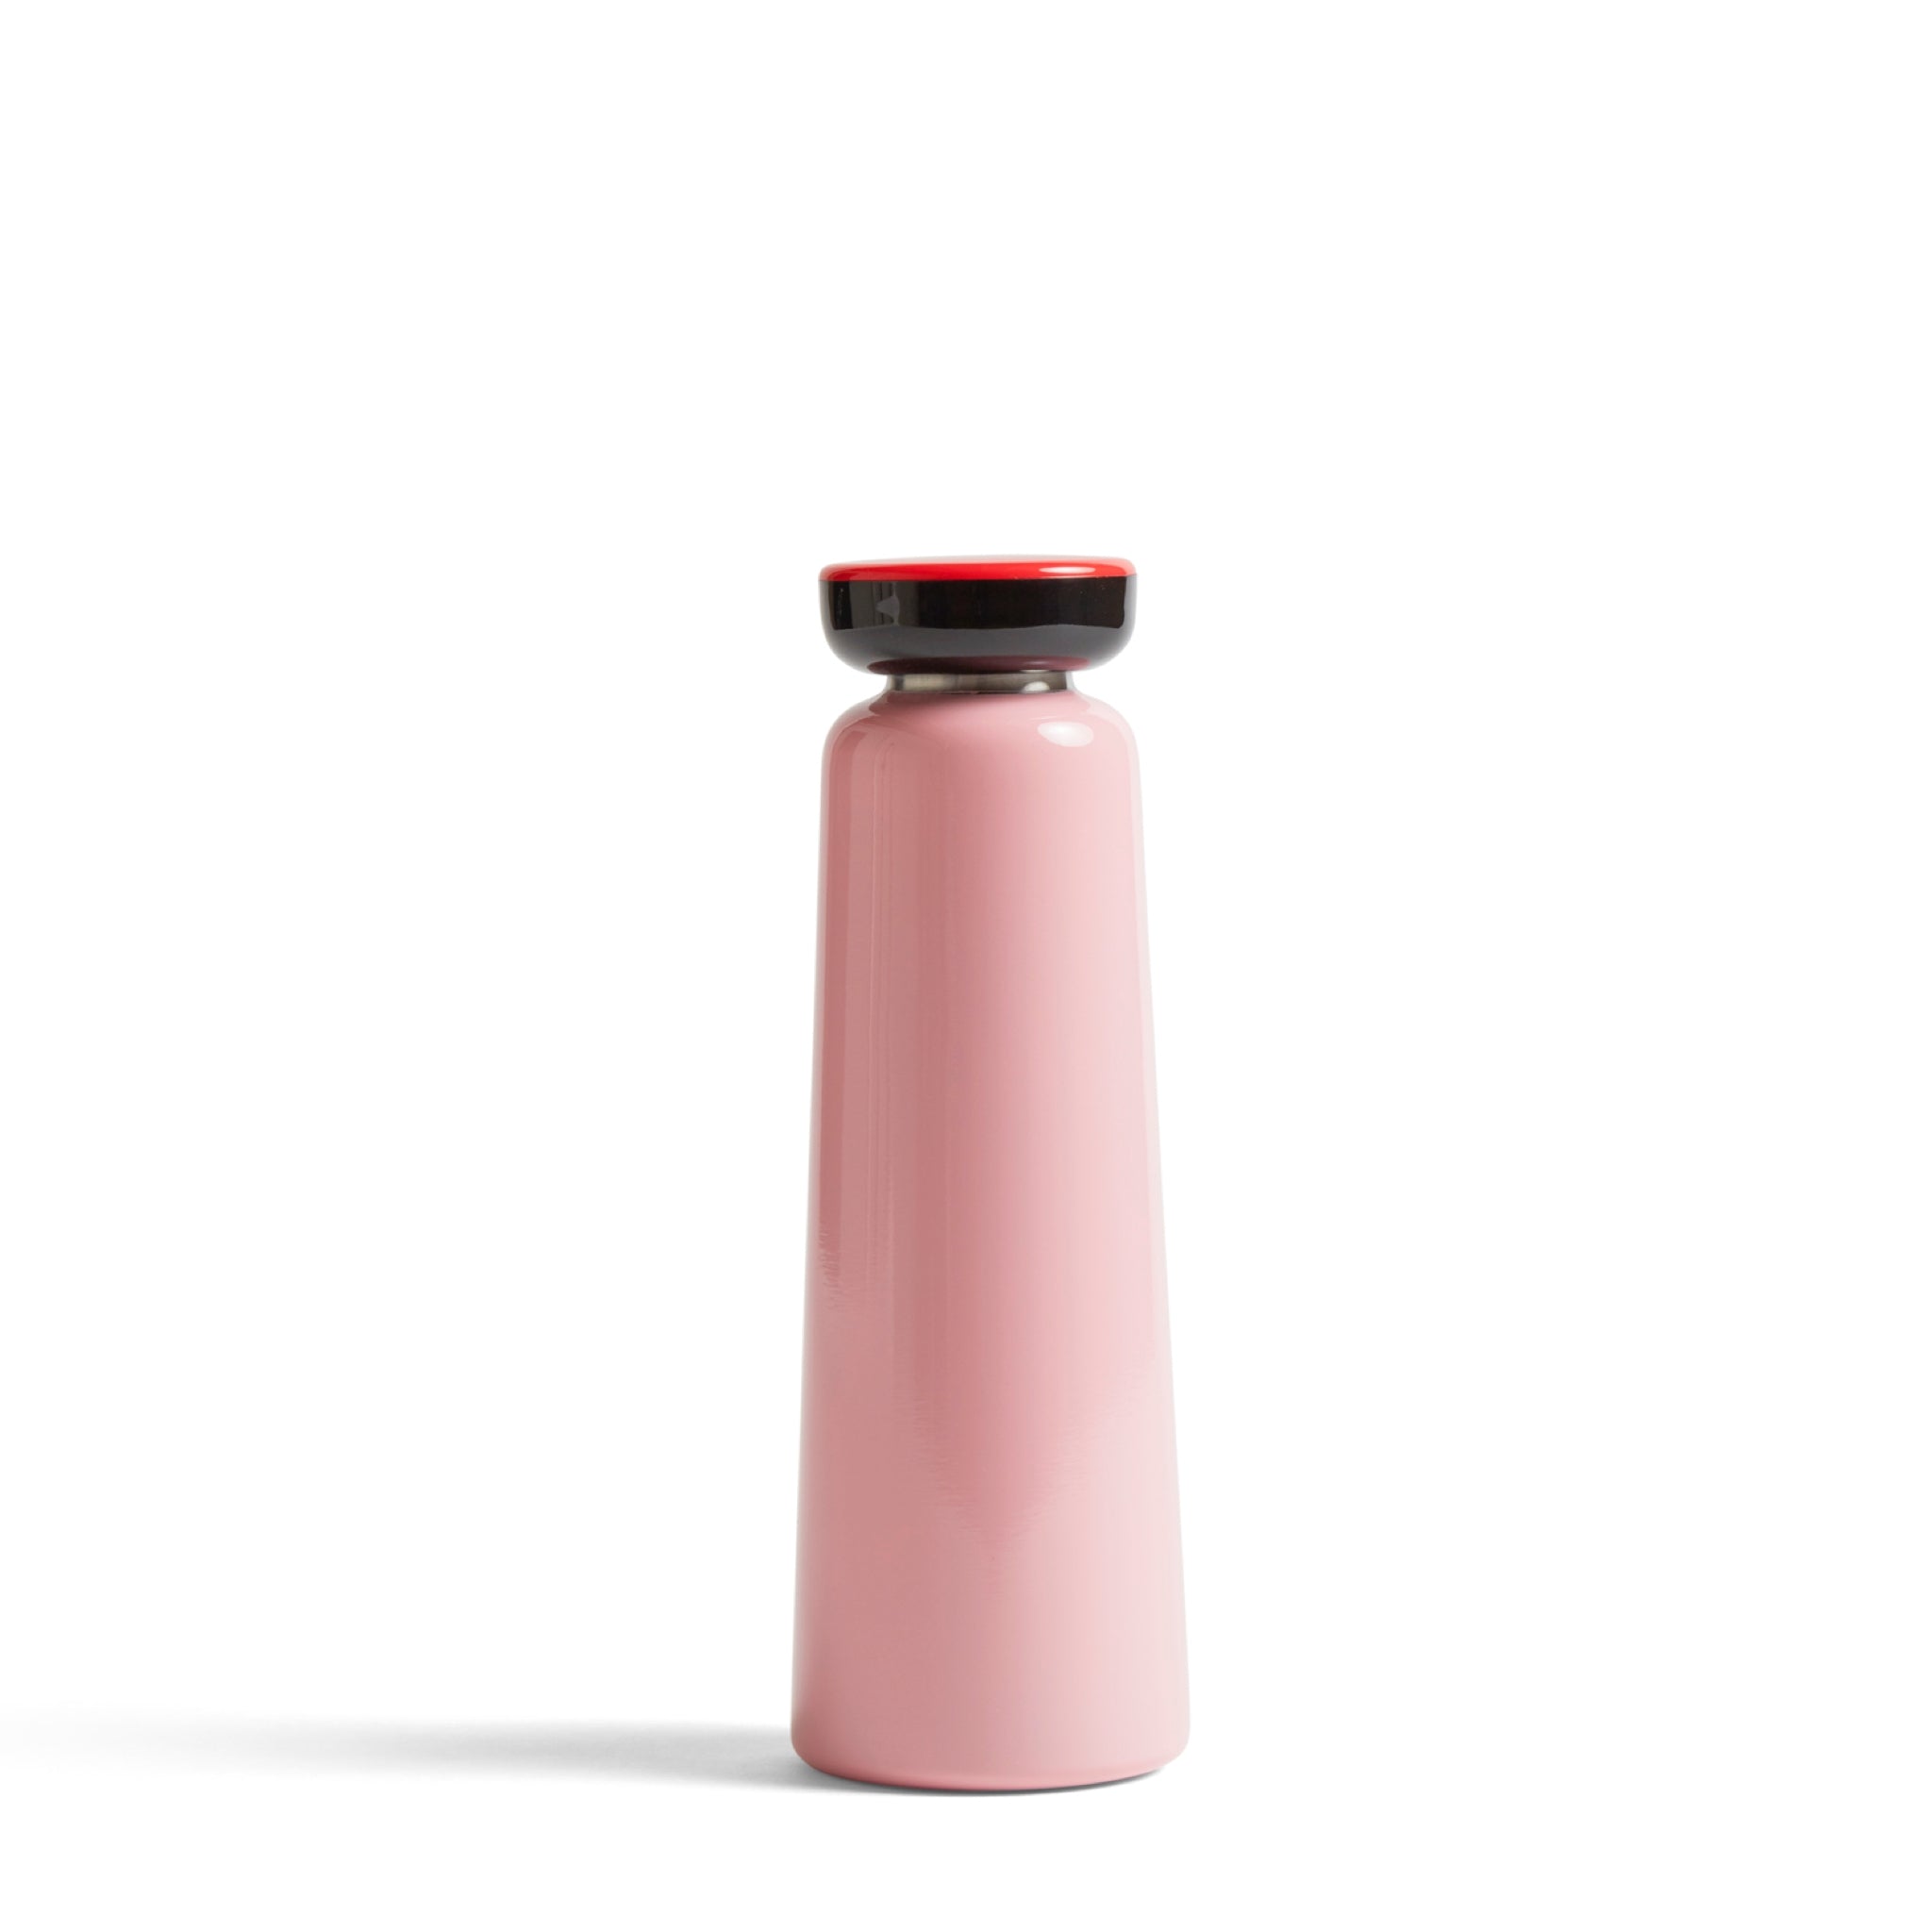 Sowden Bottle by Hay